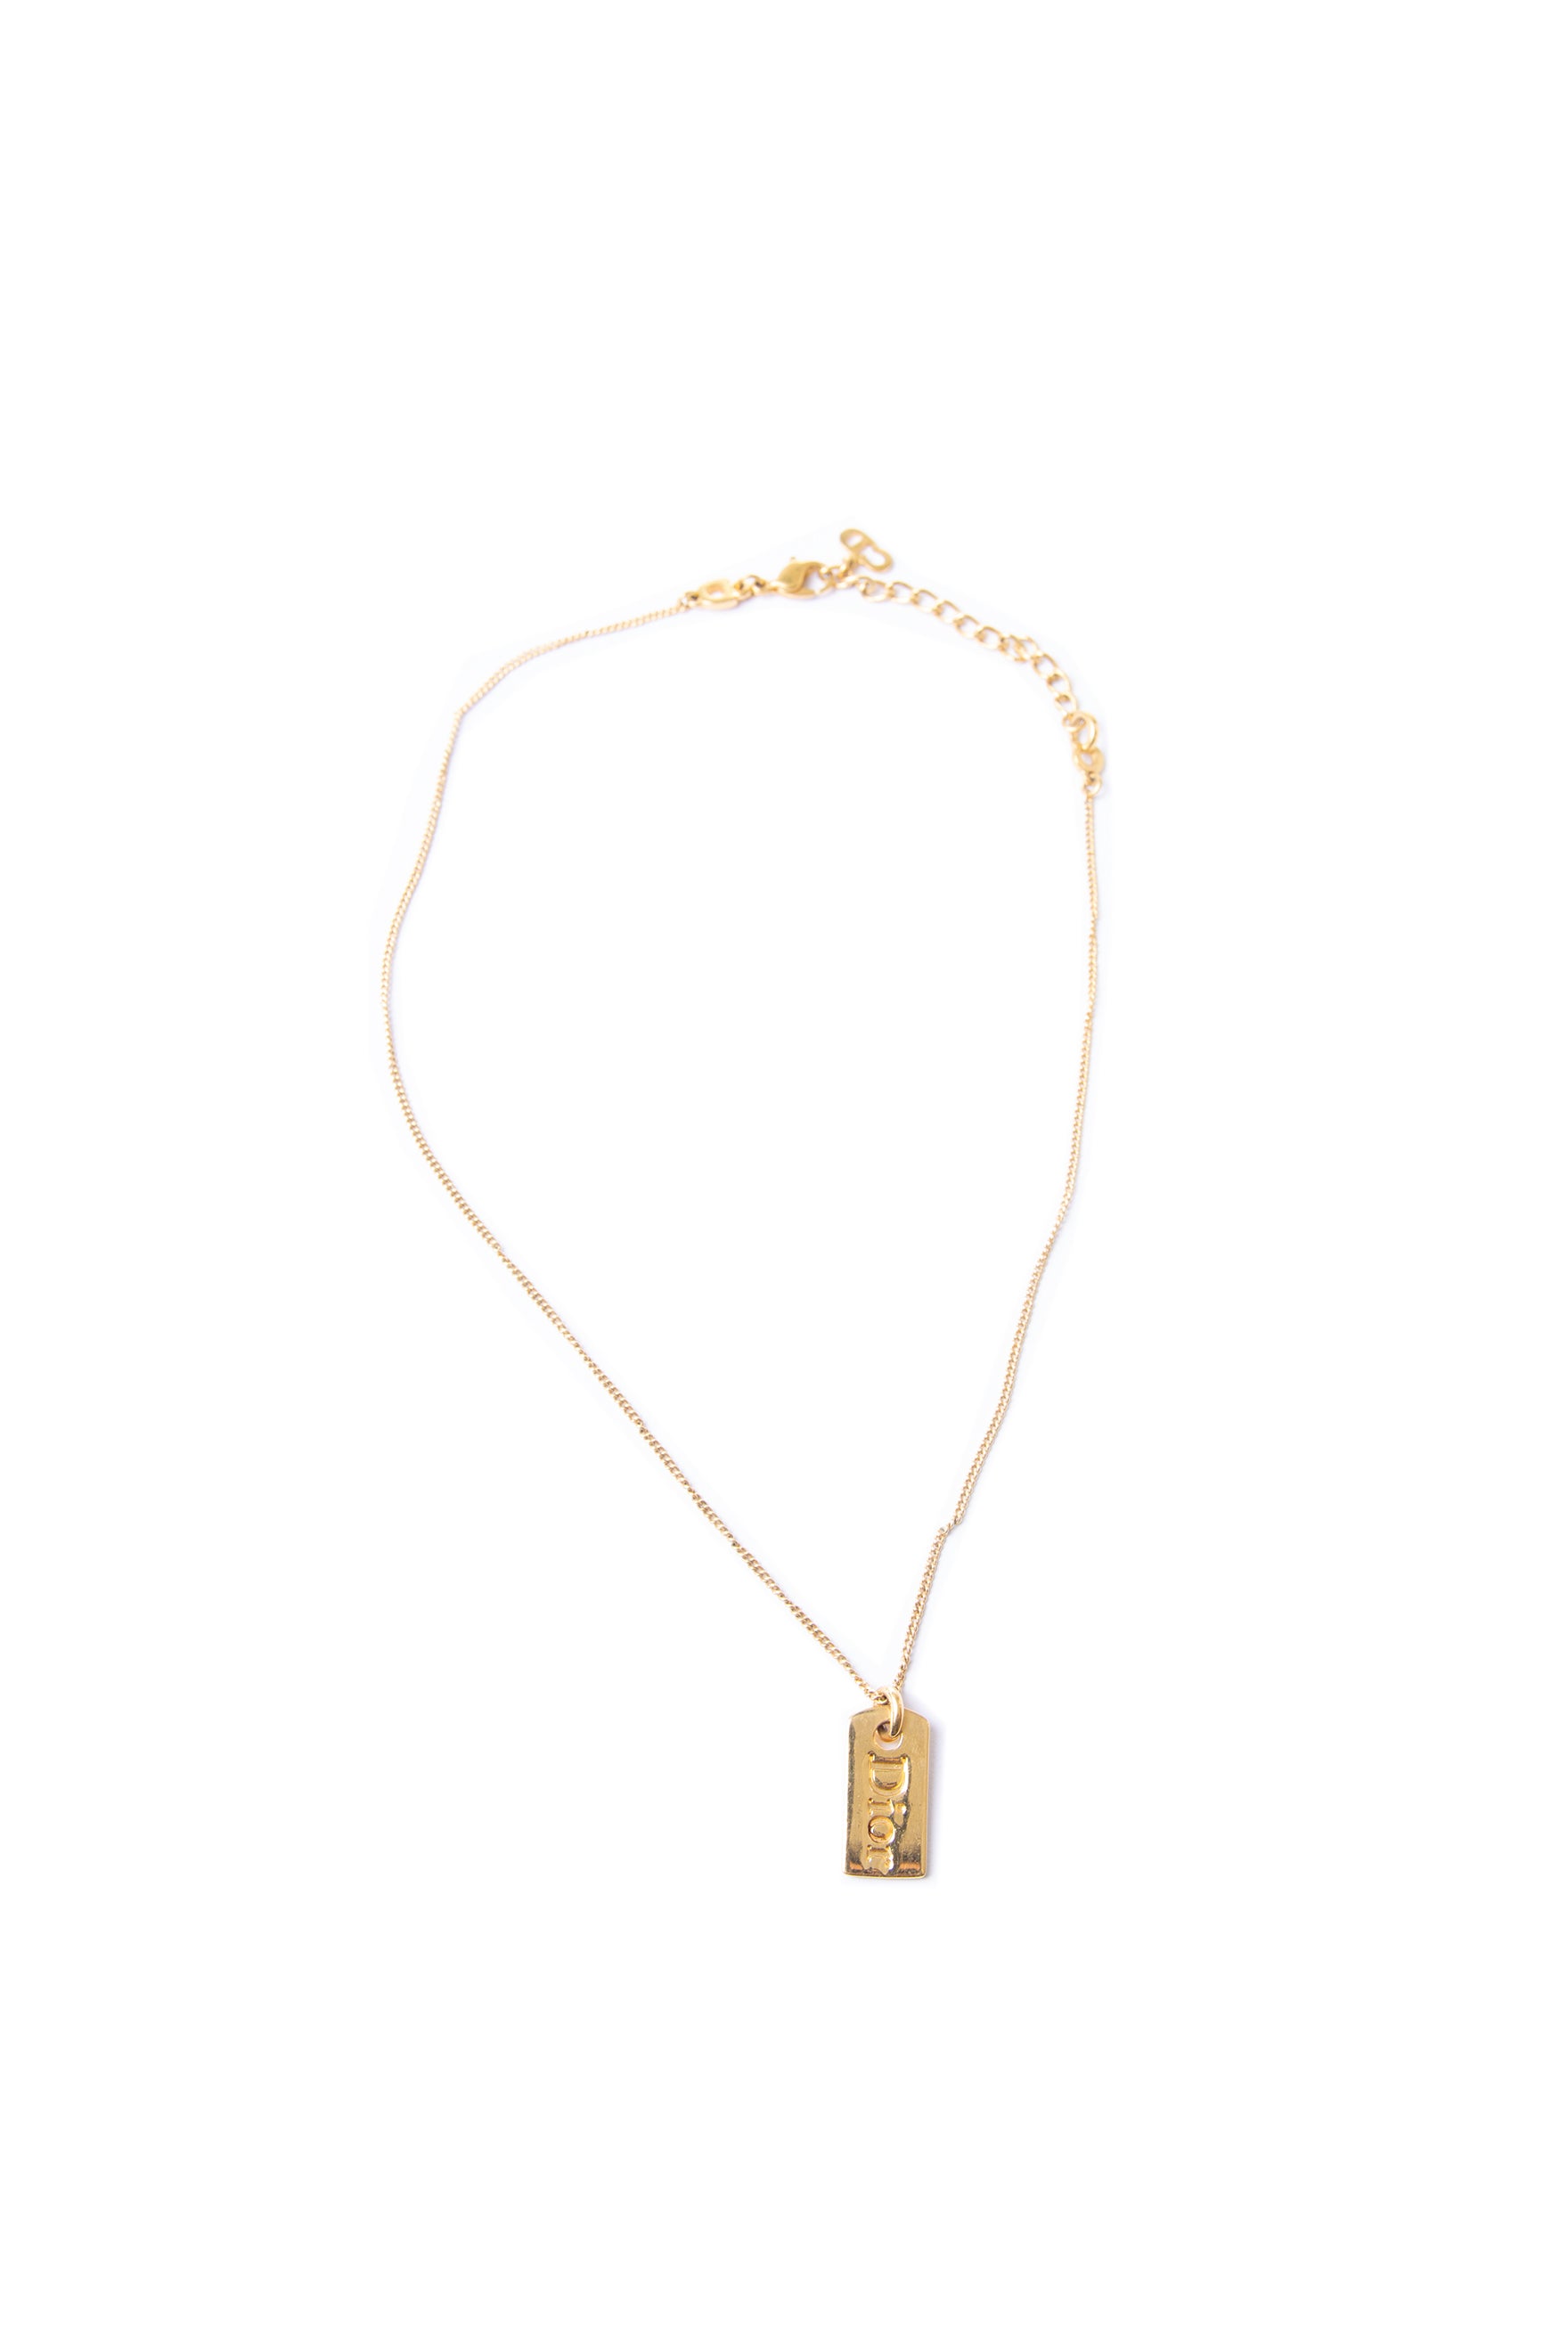 dior necklace gold tag